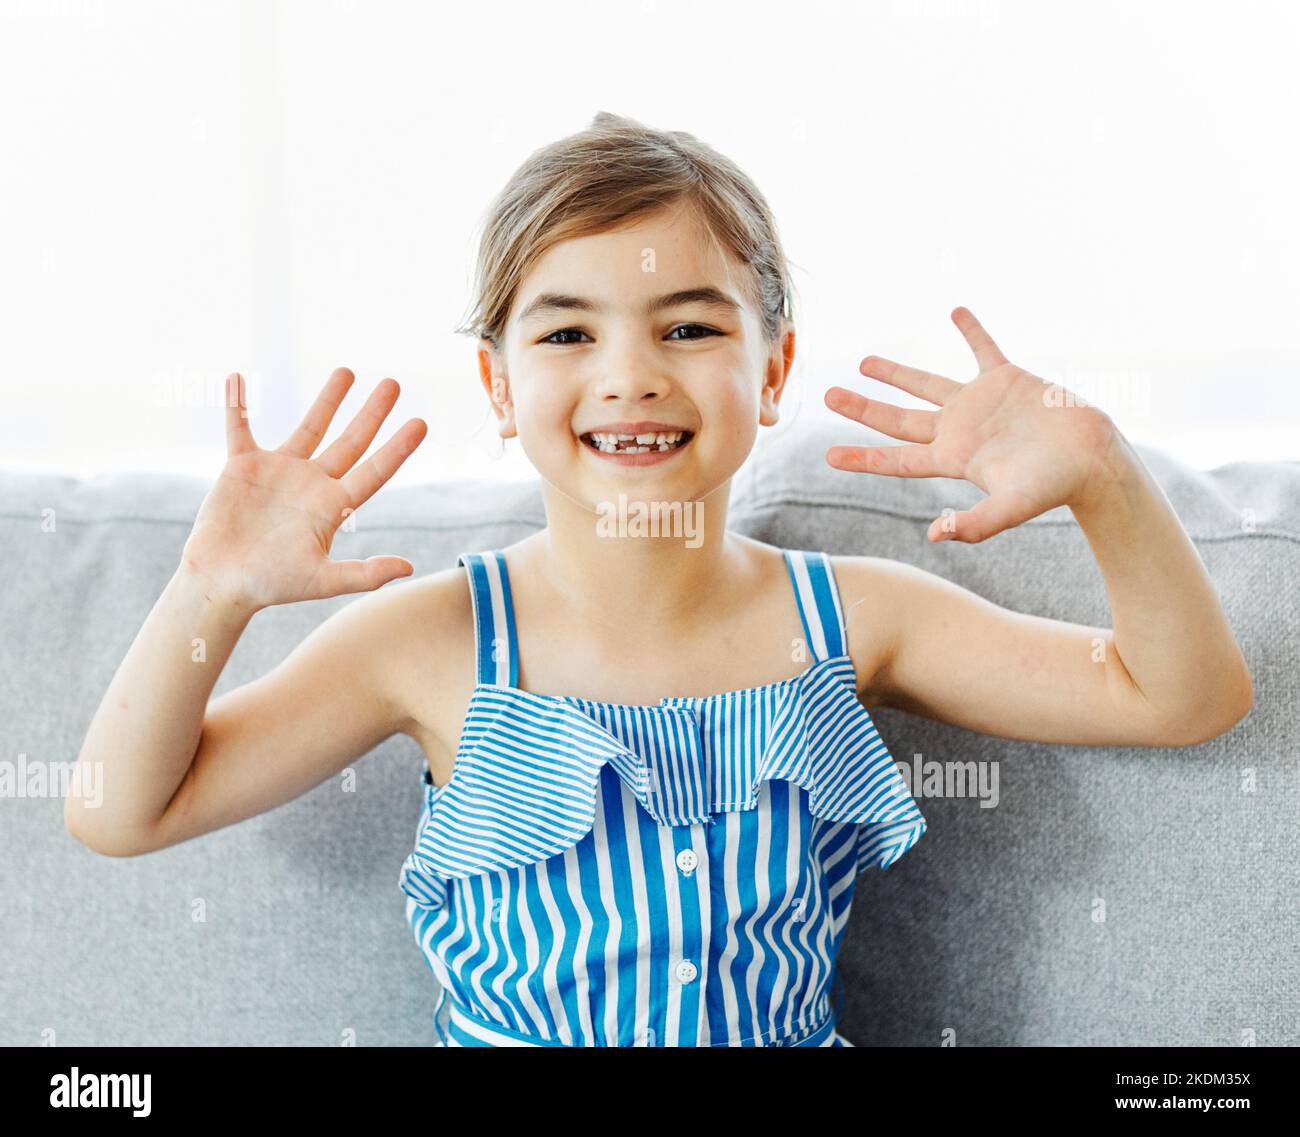 child portrait girl happy childhood cute smiling young waving kid fun happiness smile lifestyle cheerful hand Stock Photo